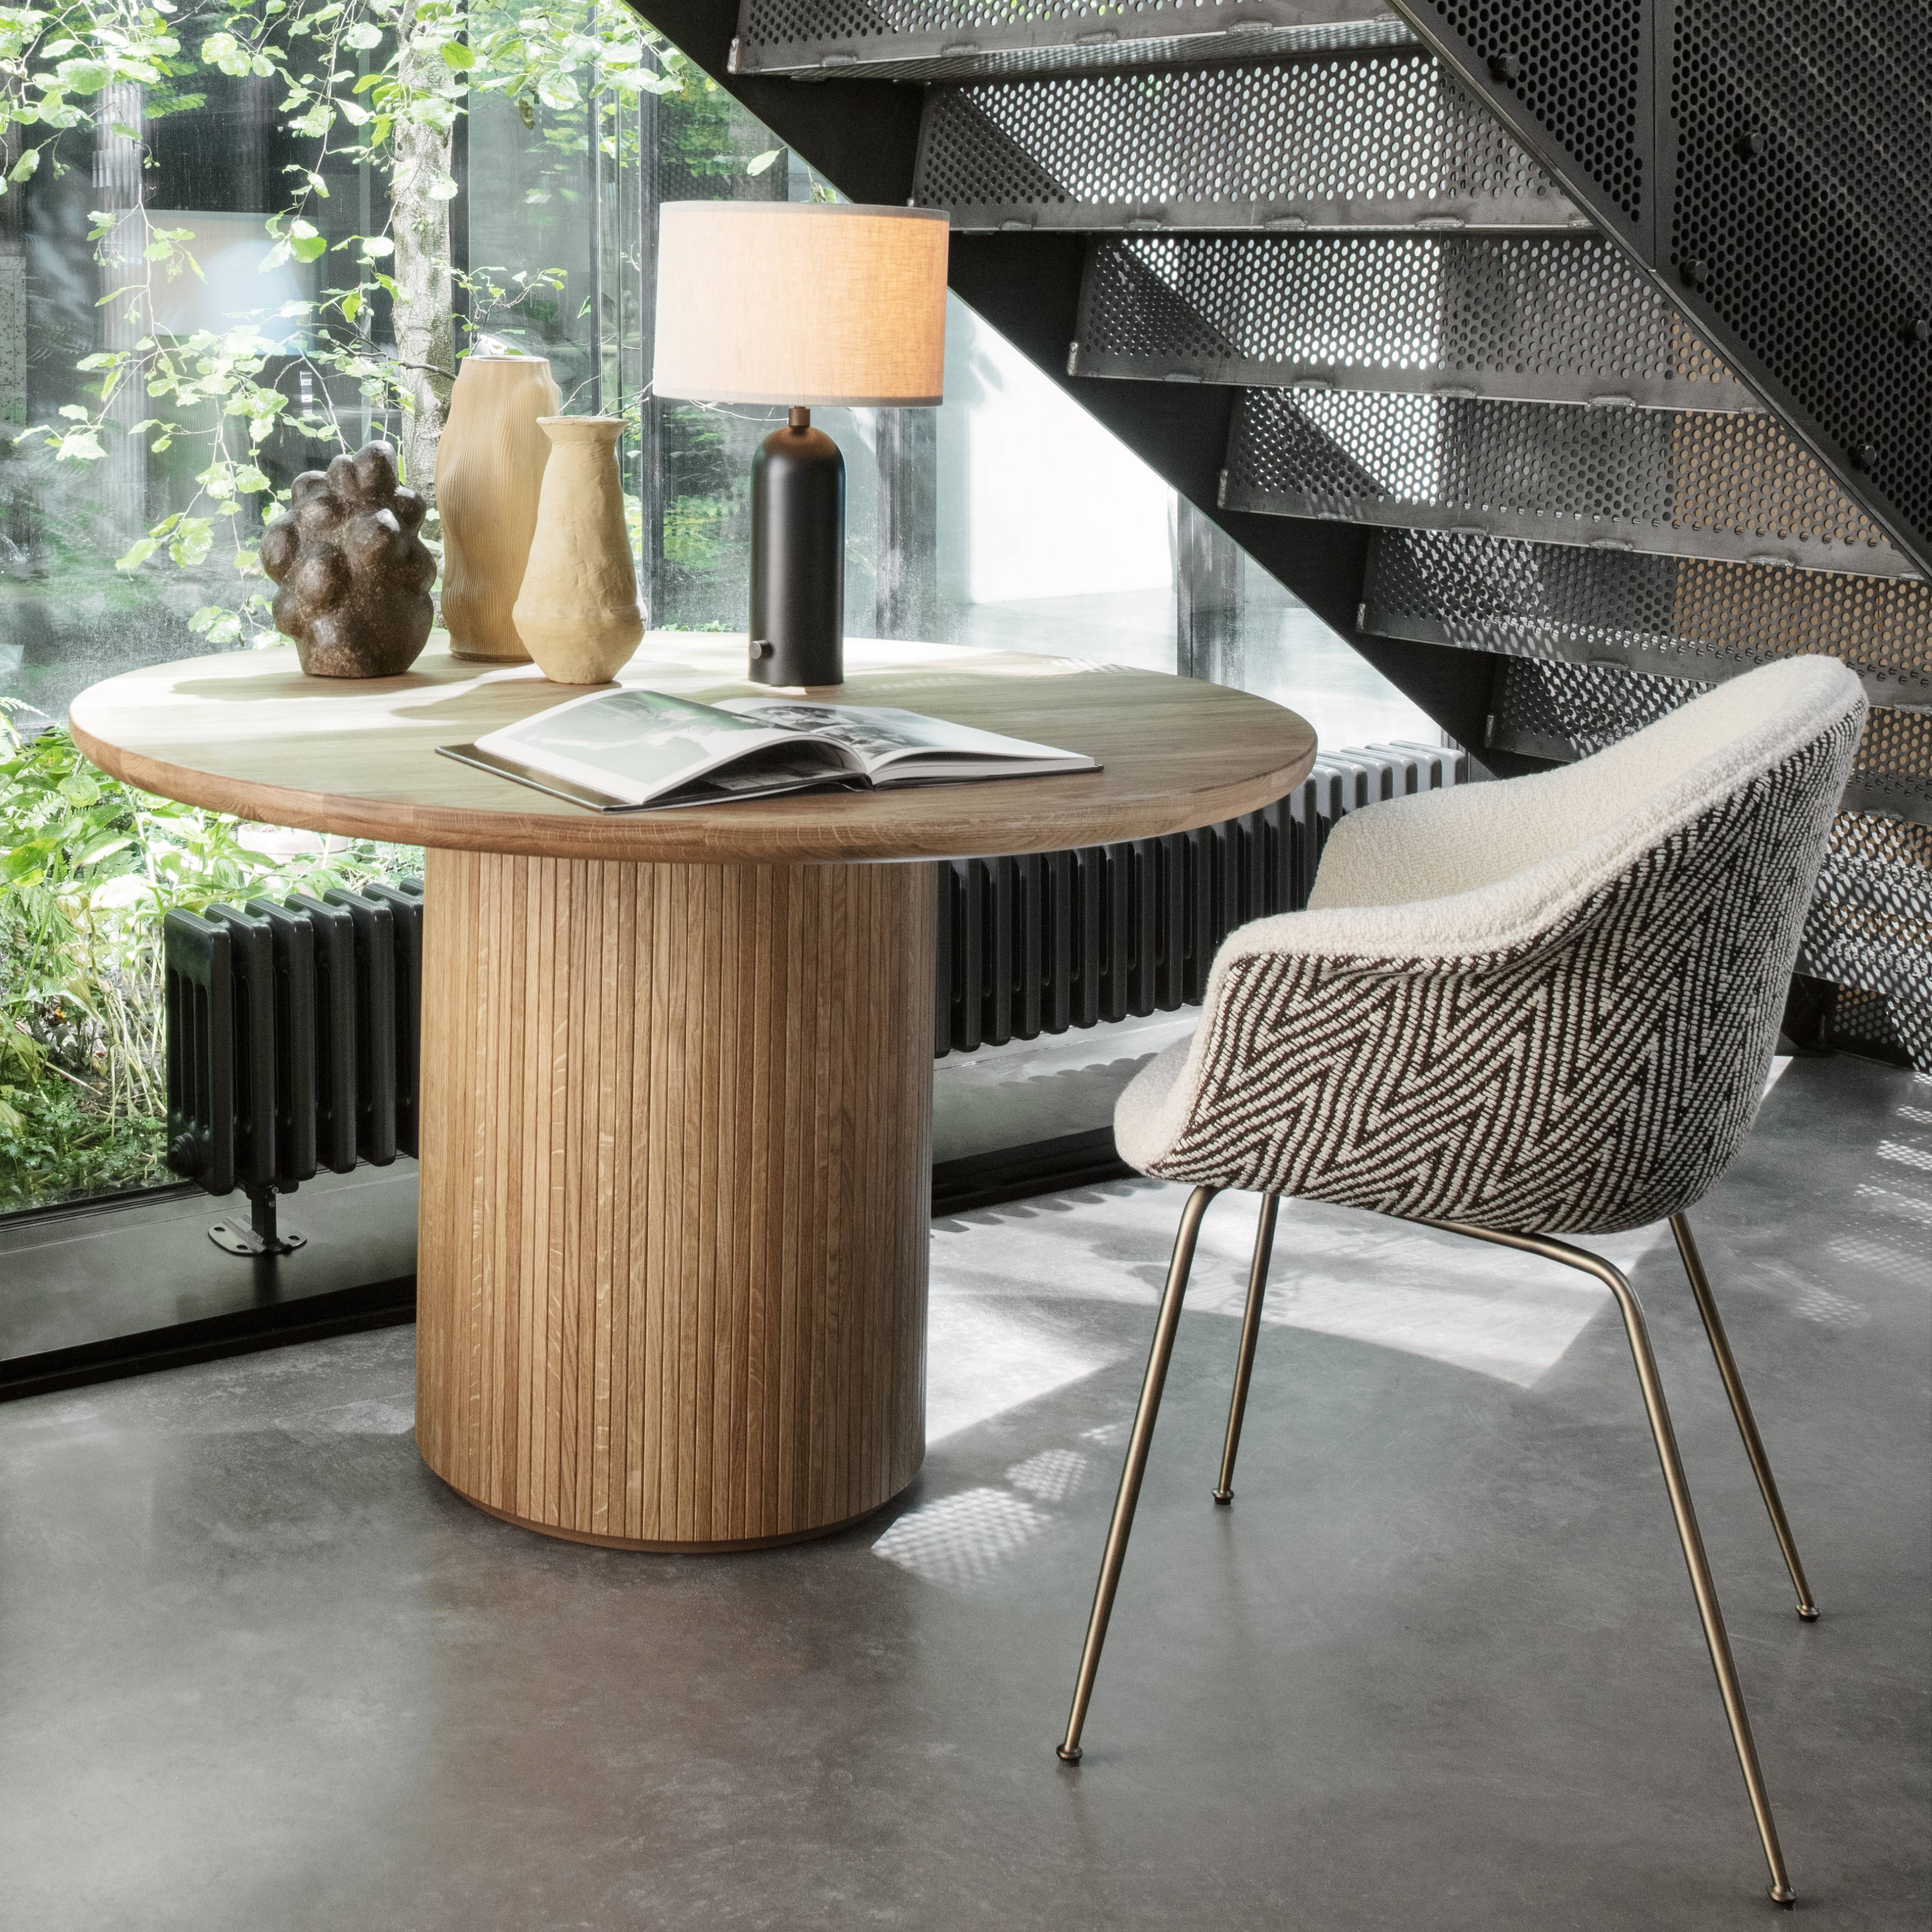 Moon Dining Table: Round